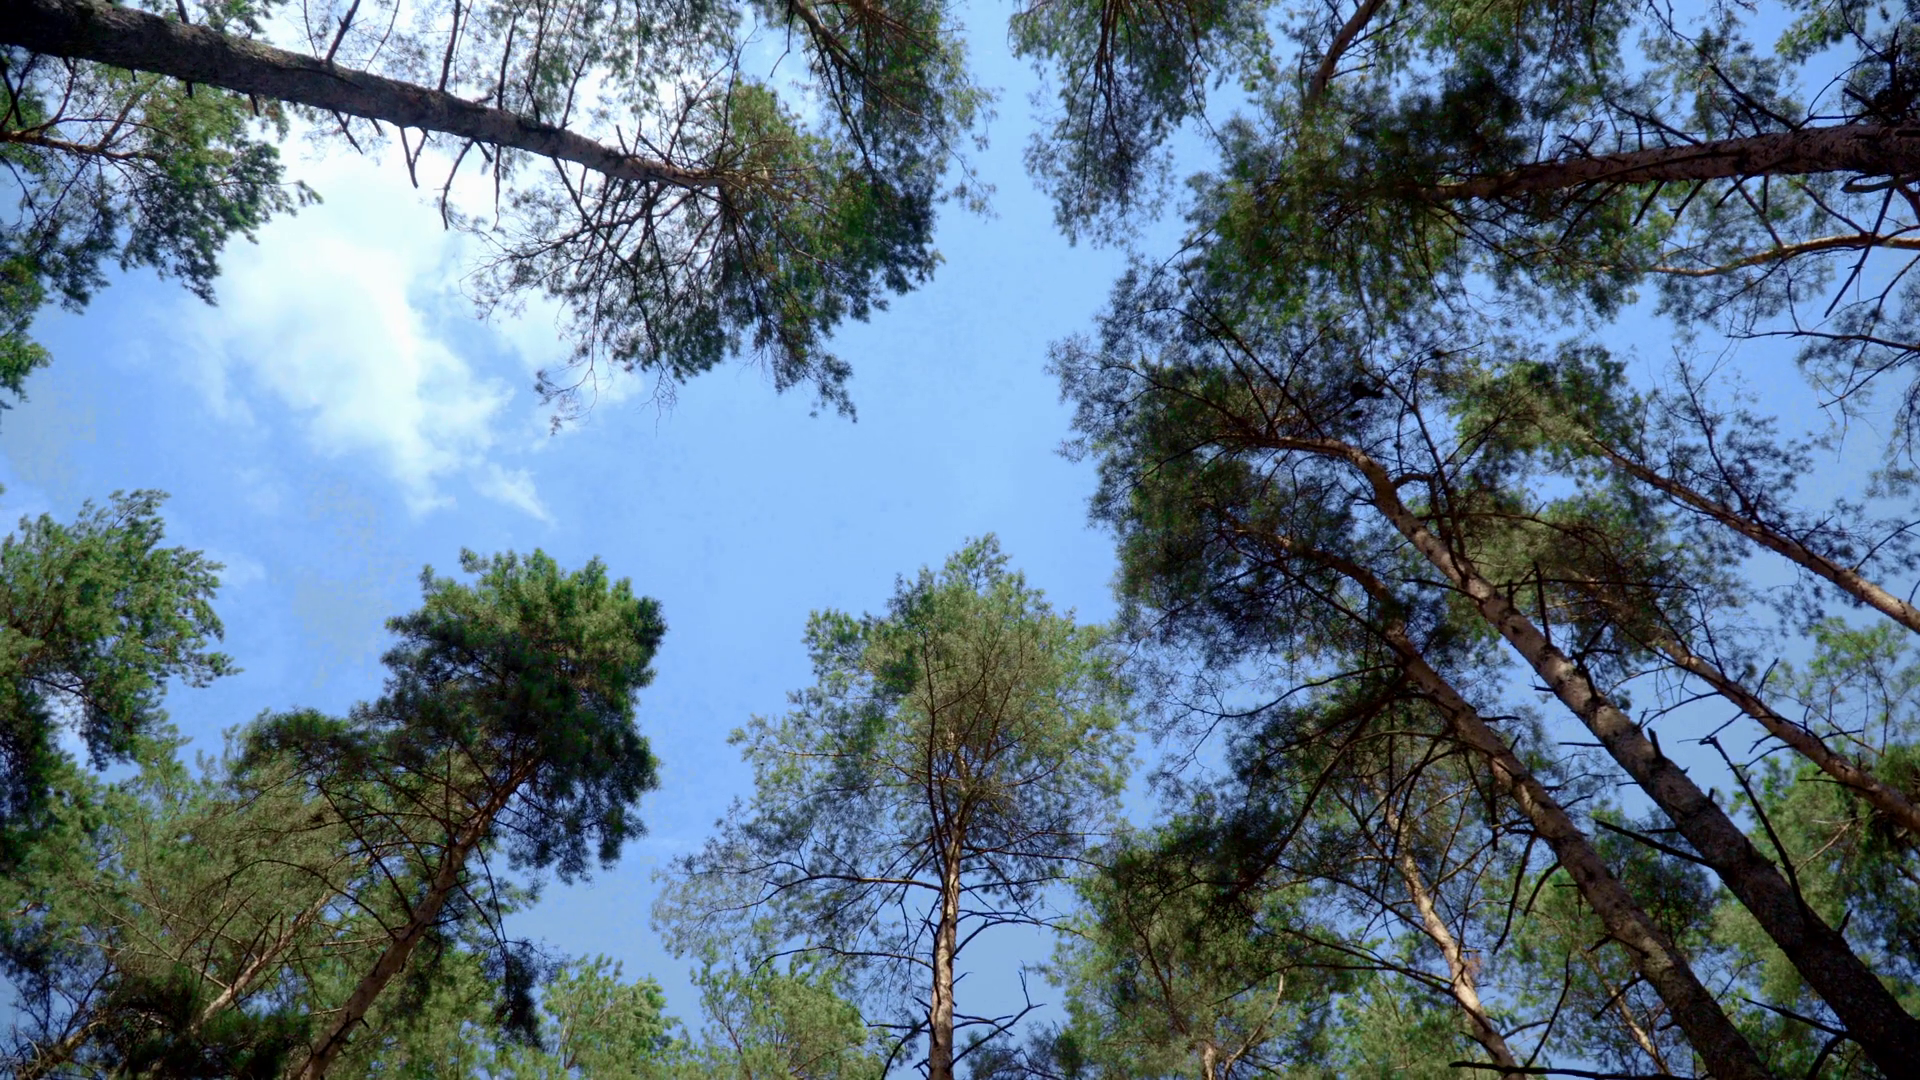 View of pines from bottom up. Crowns of pine trees against blue